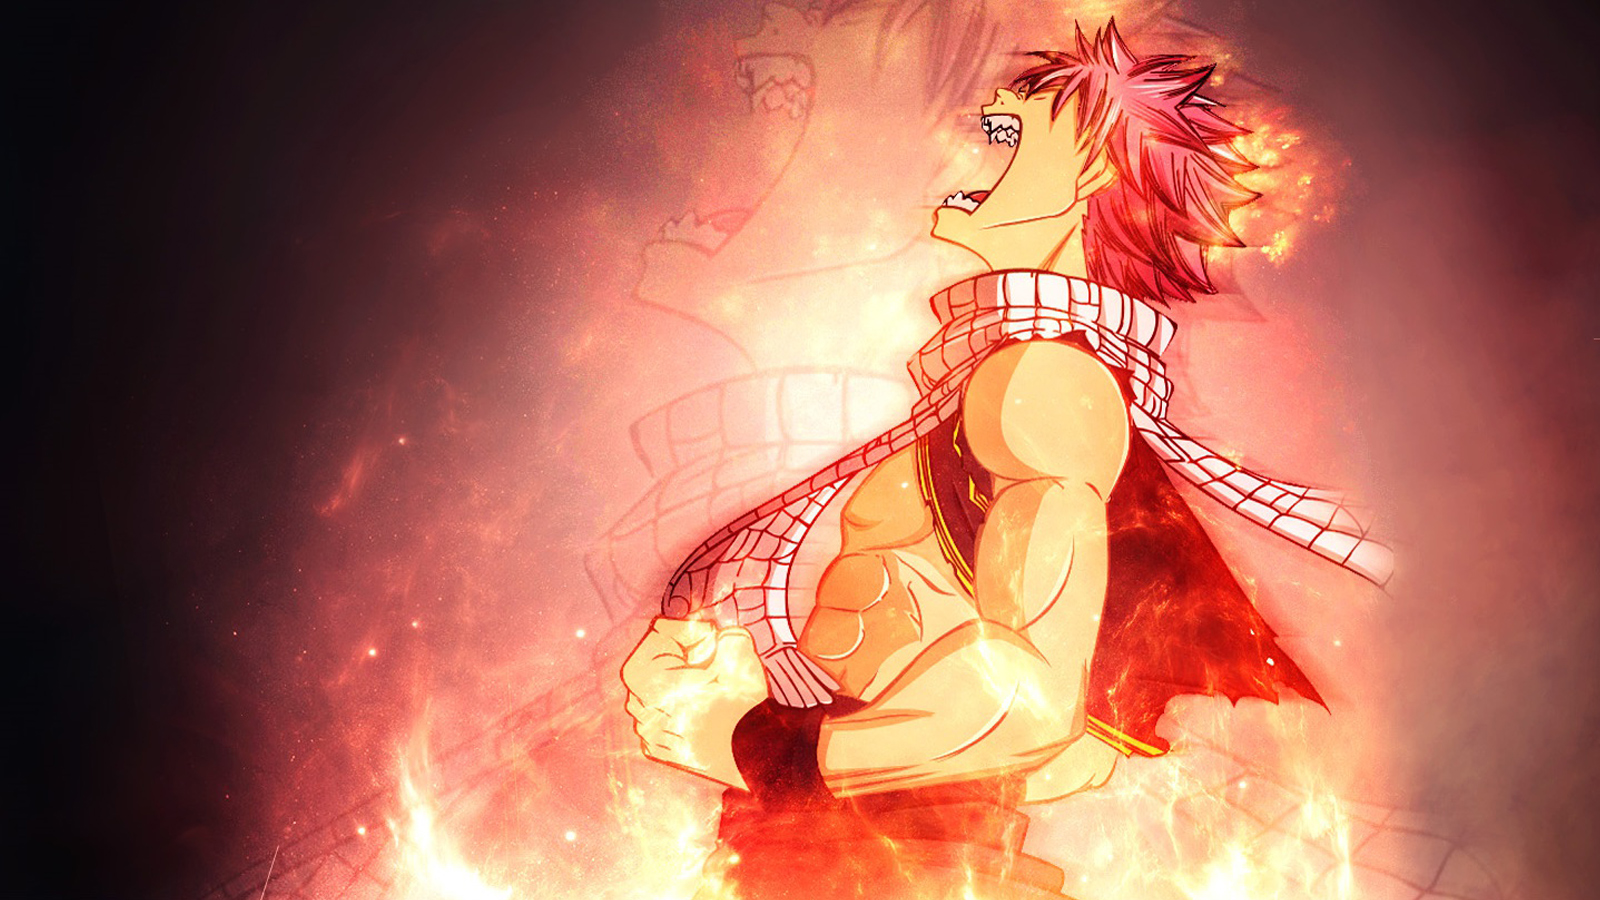 Natsu Dragneel Fairy Tail Anime HD Wallpaper Image Picture